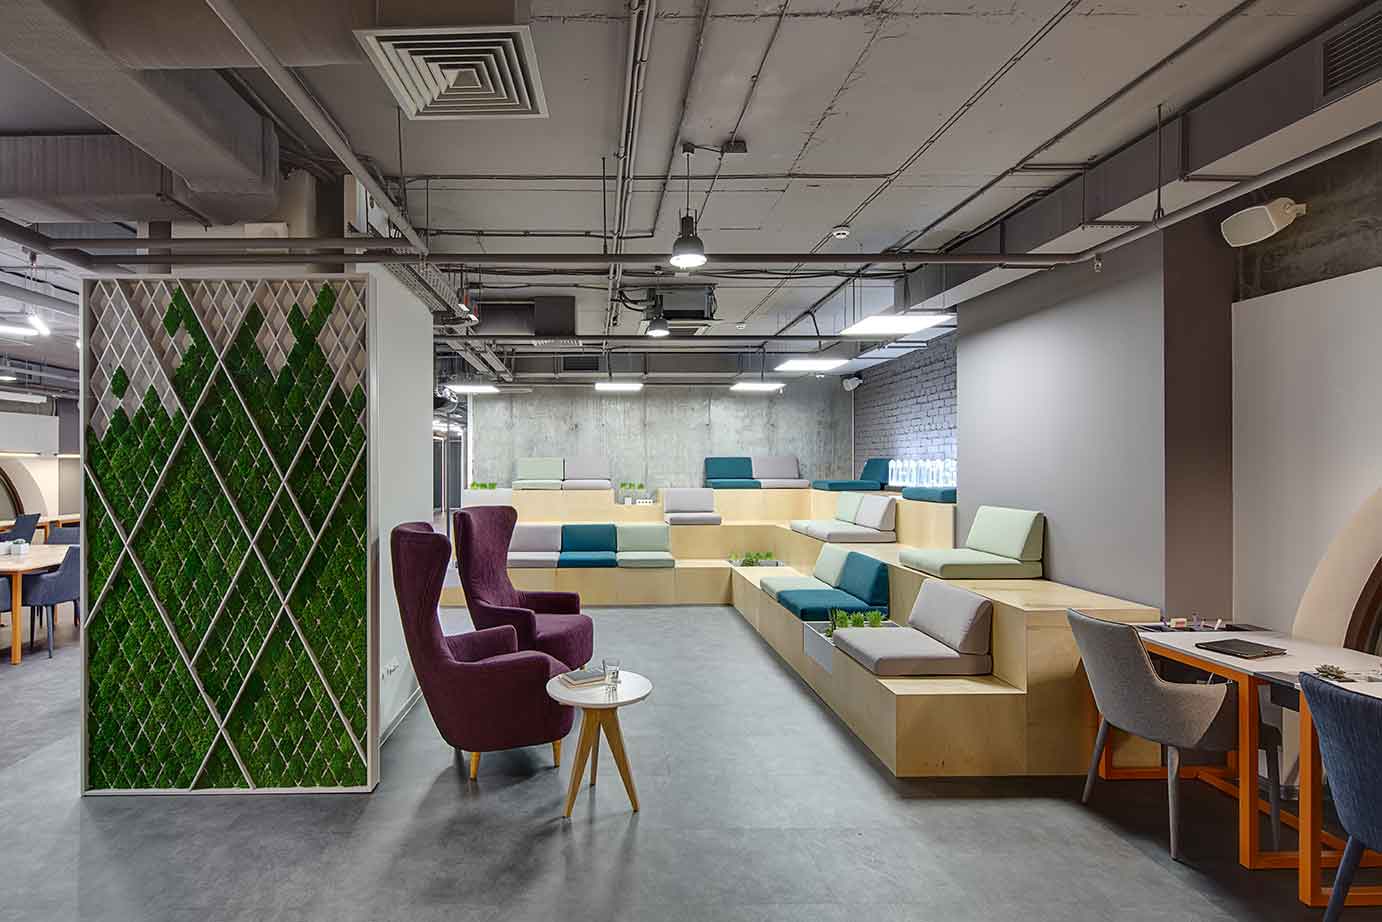 Office space optimisation: How catering services can create flexible, energising and profitable spaces